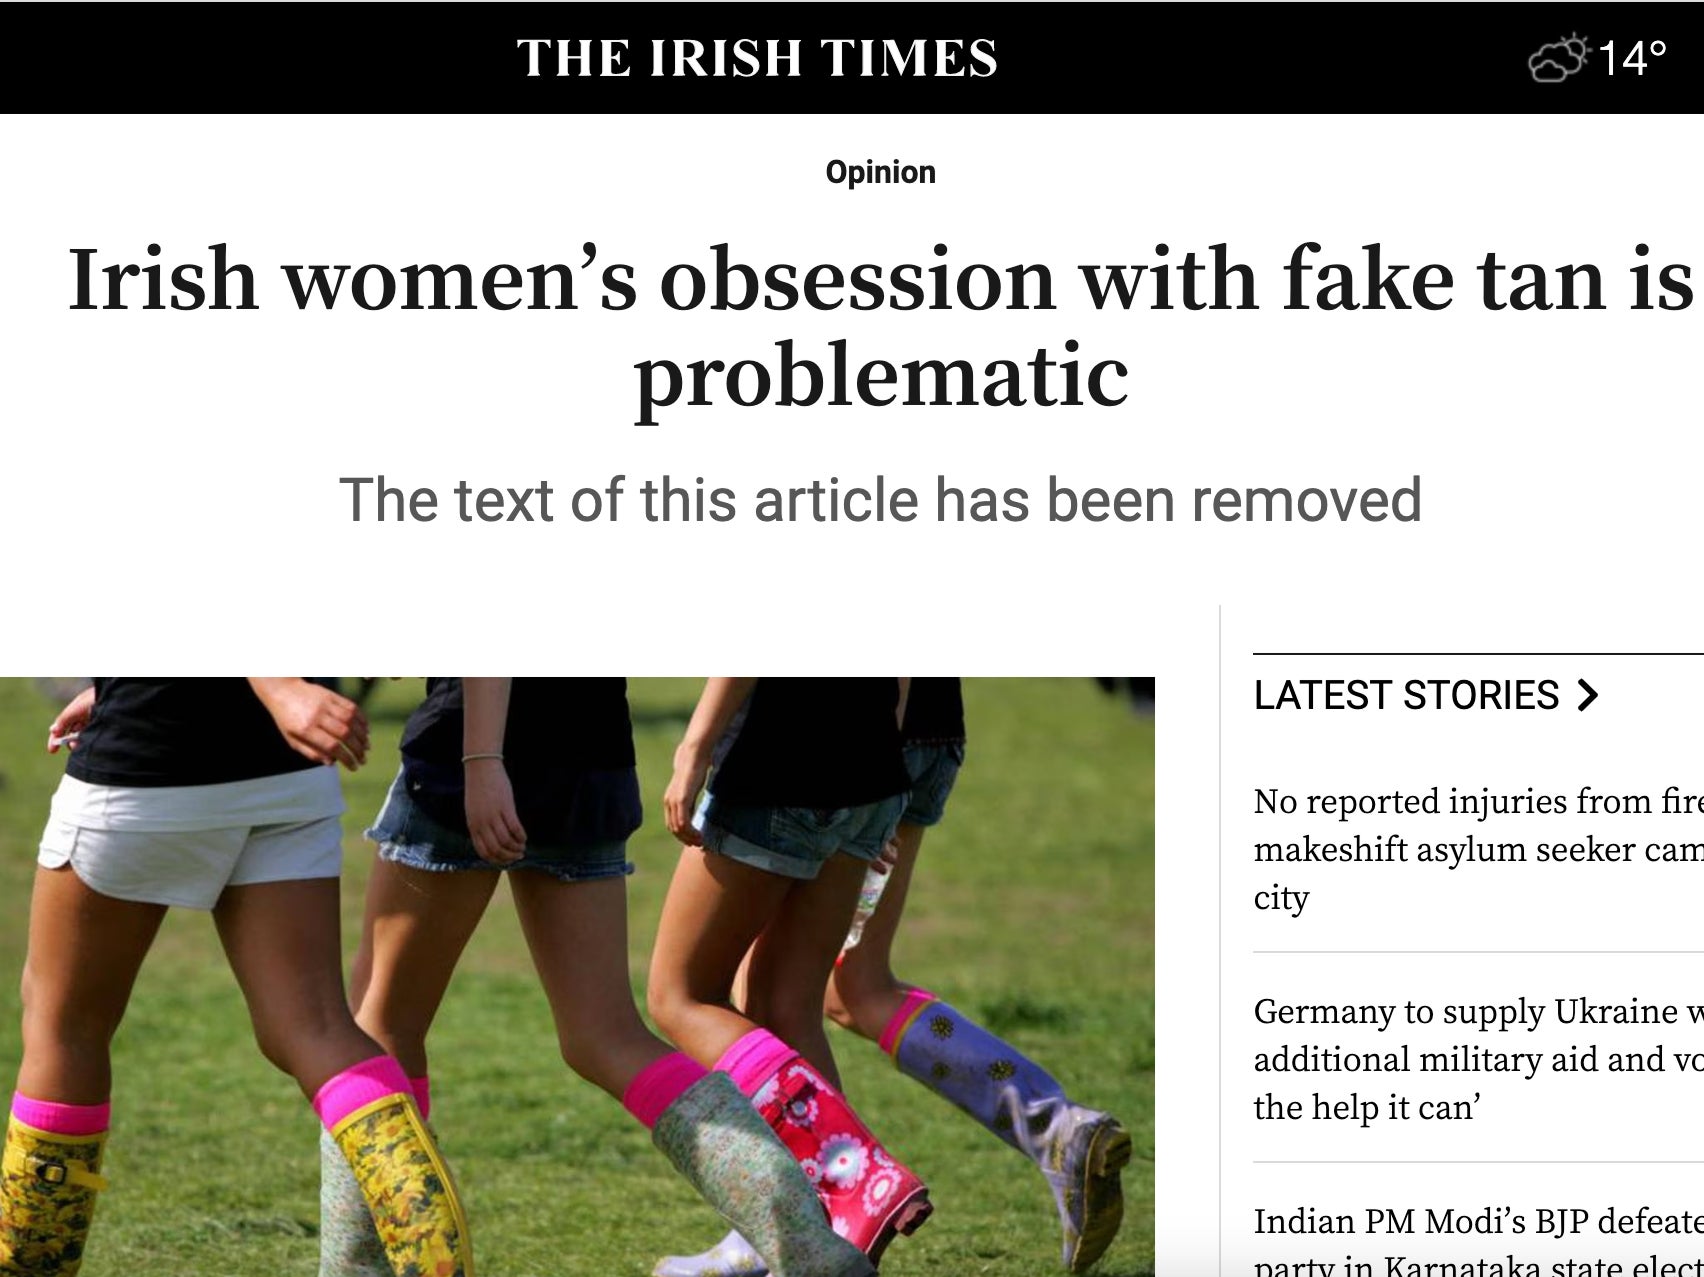 <p>The Irish Times has removed the text of the article</p>